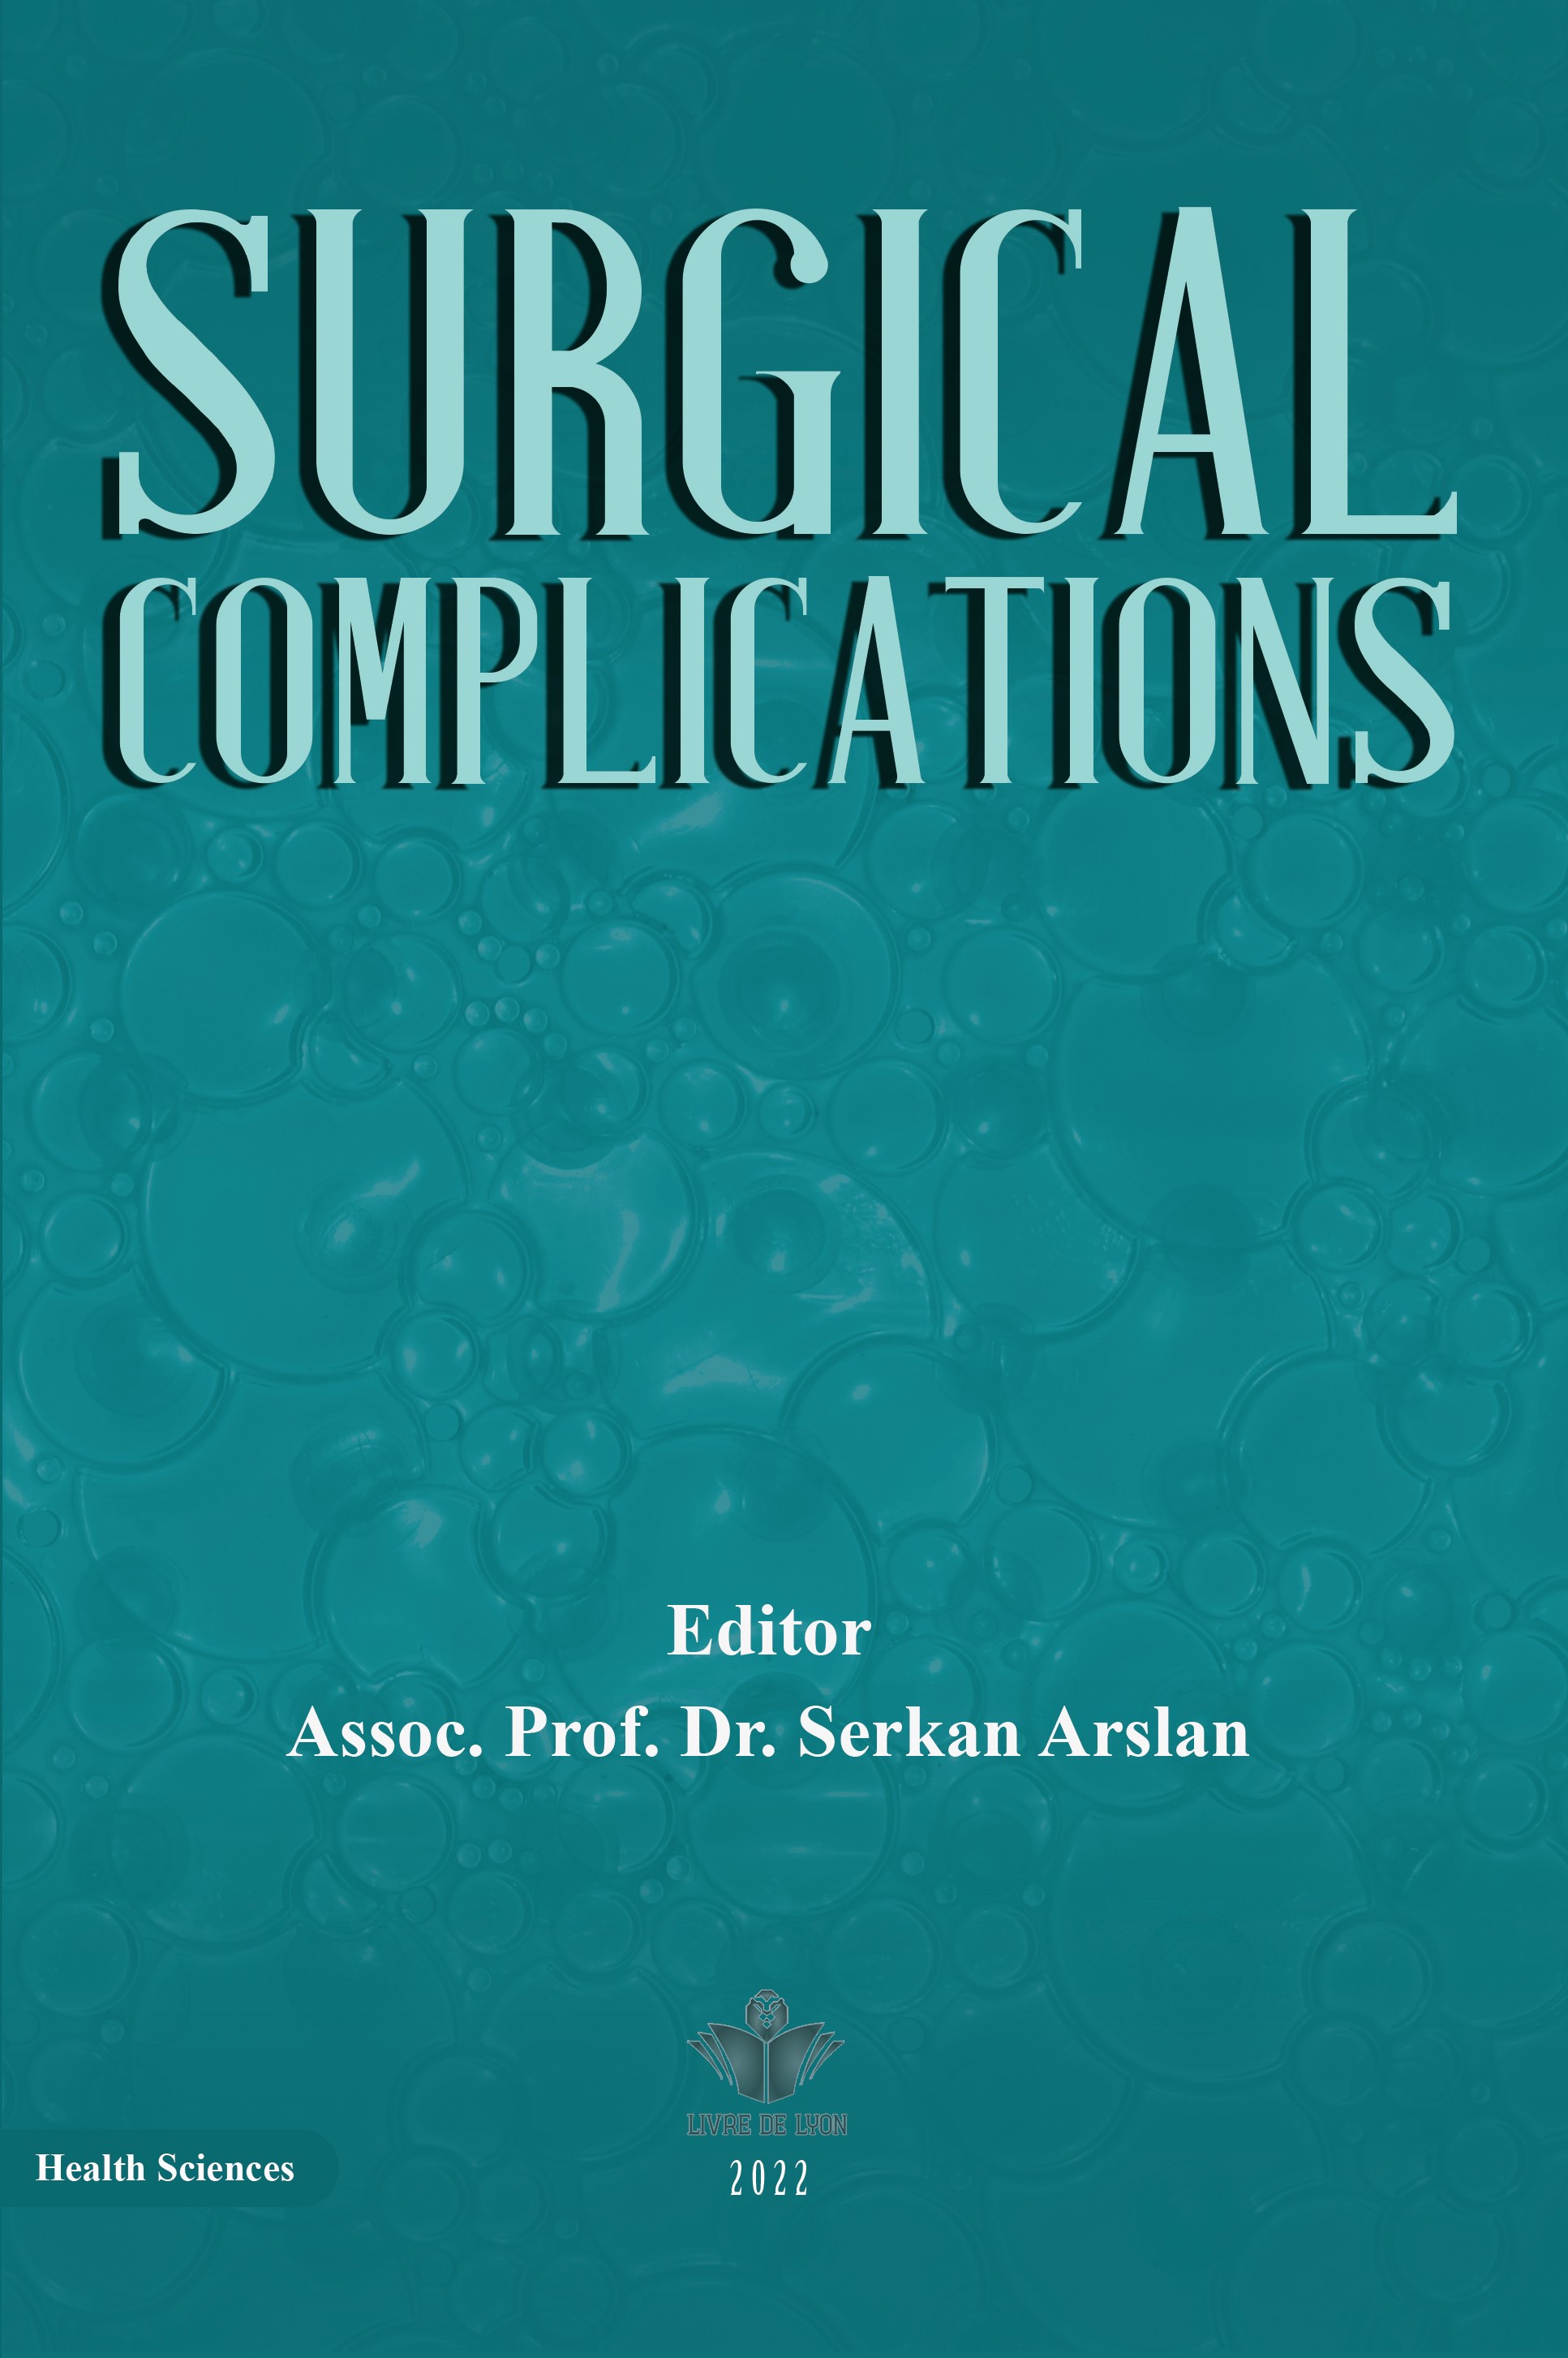 Surgical Complications